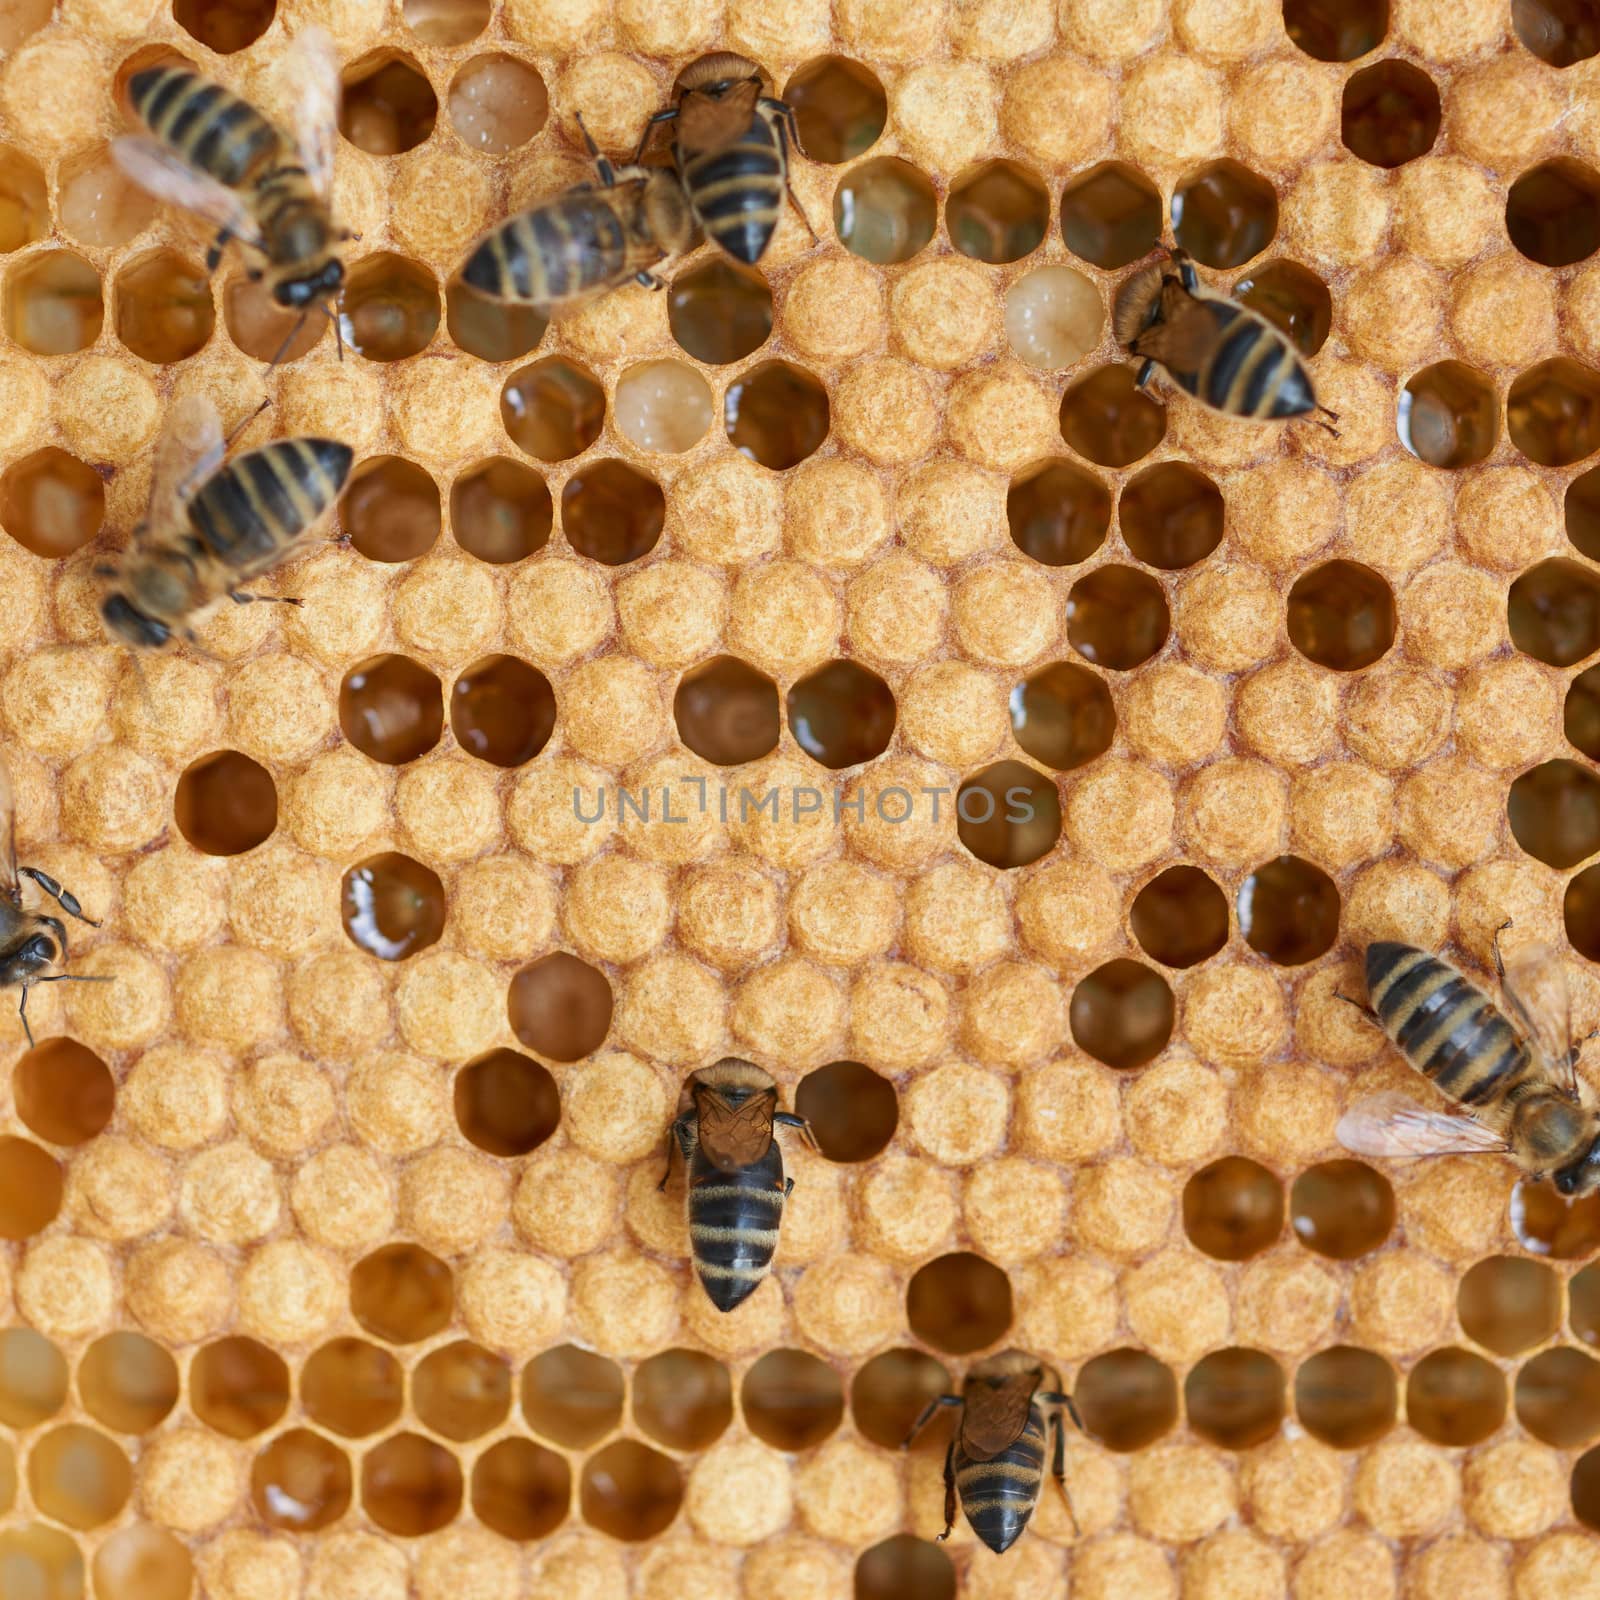 Honeycomb and worker honey bees close-up